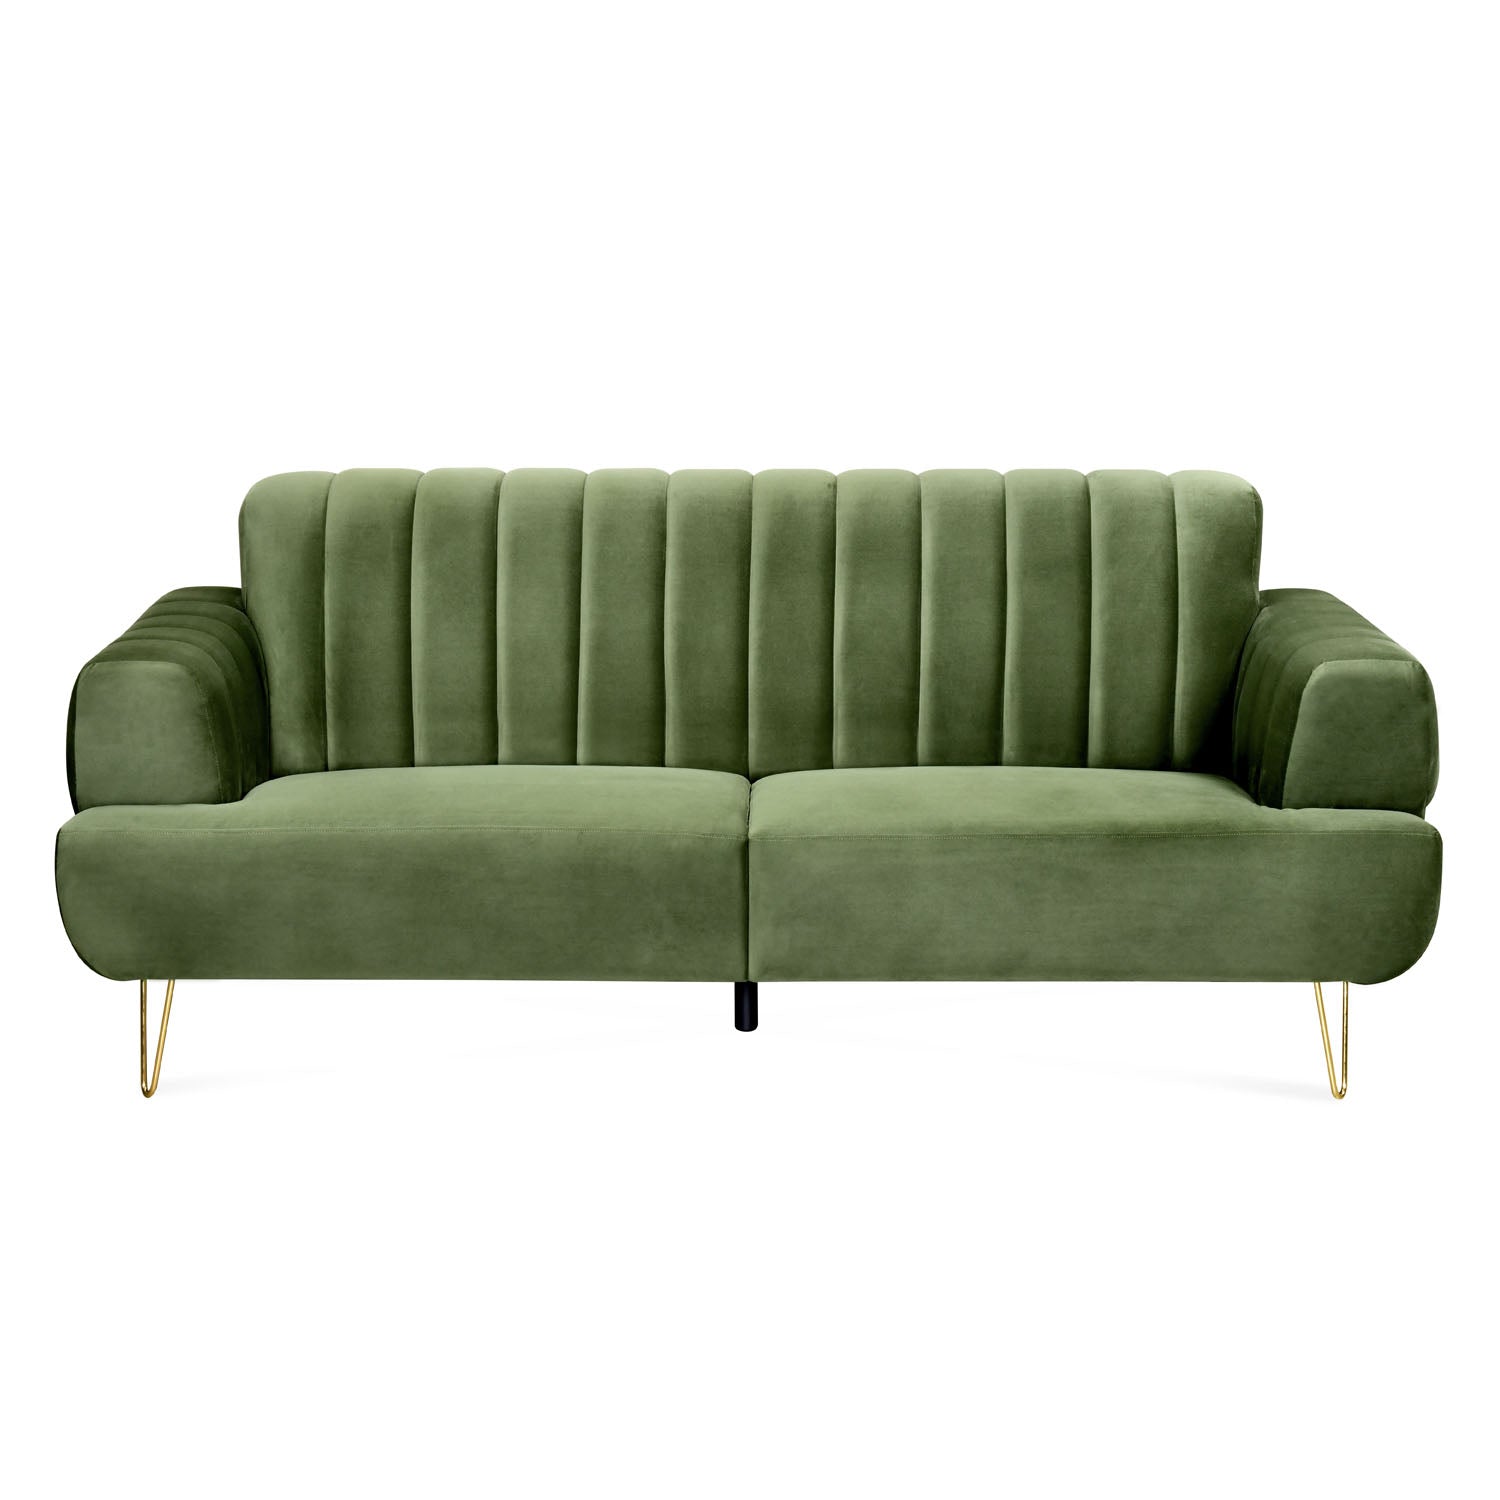 Somerville 3 Seater Sofa (Olive Green)